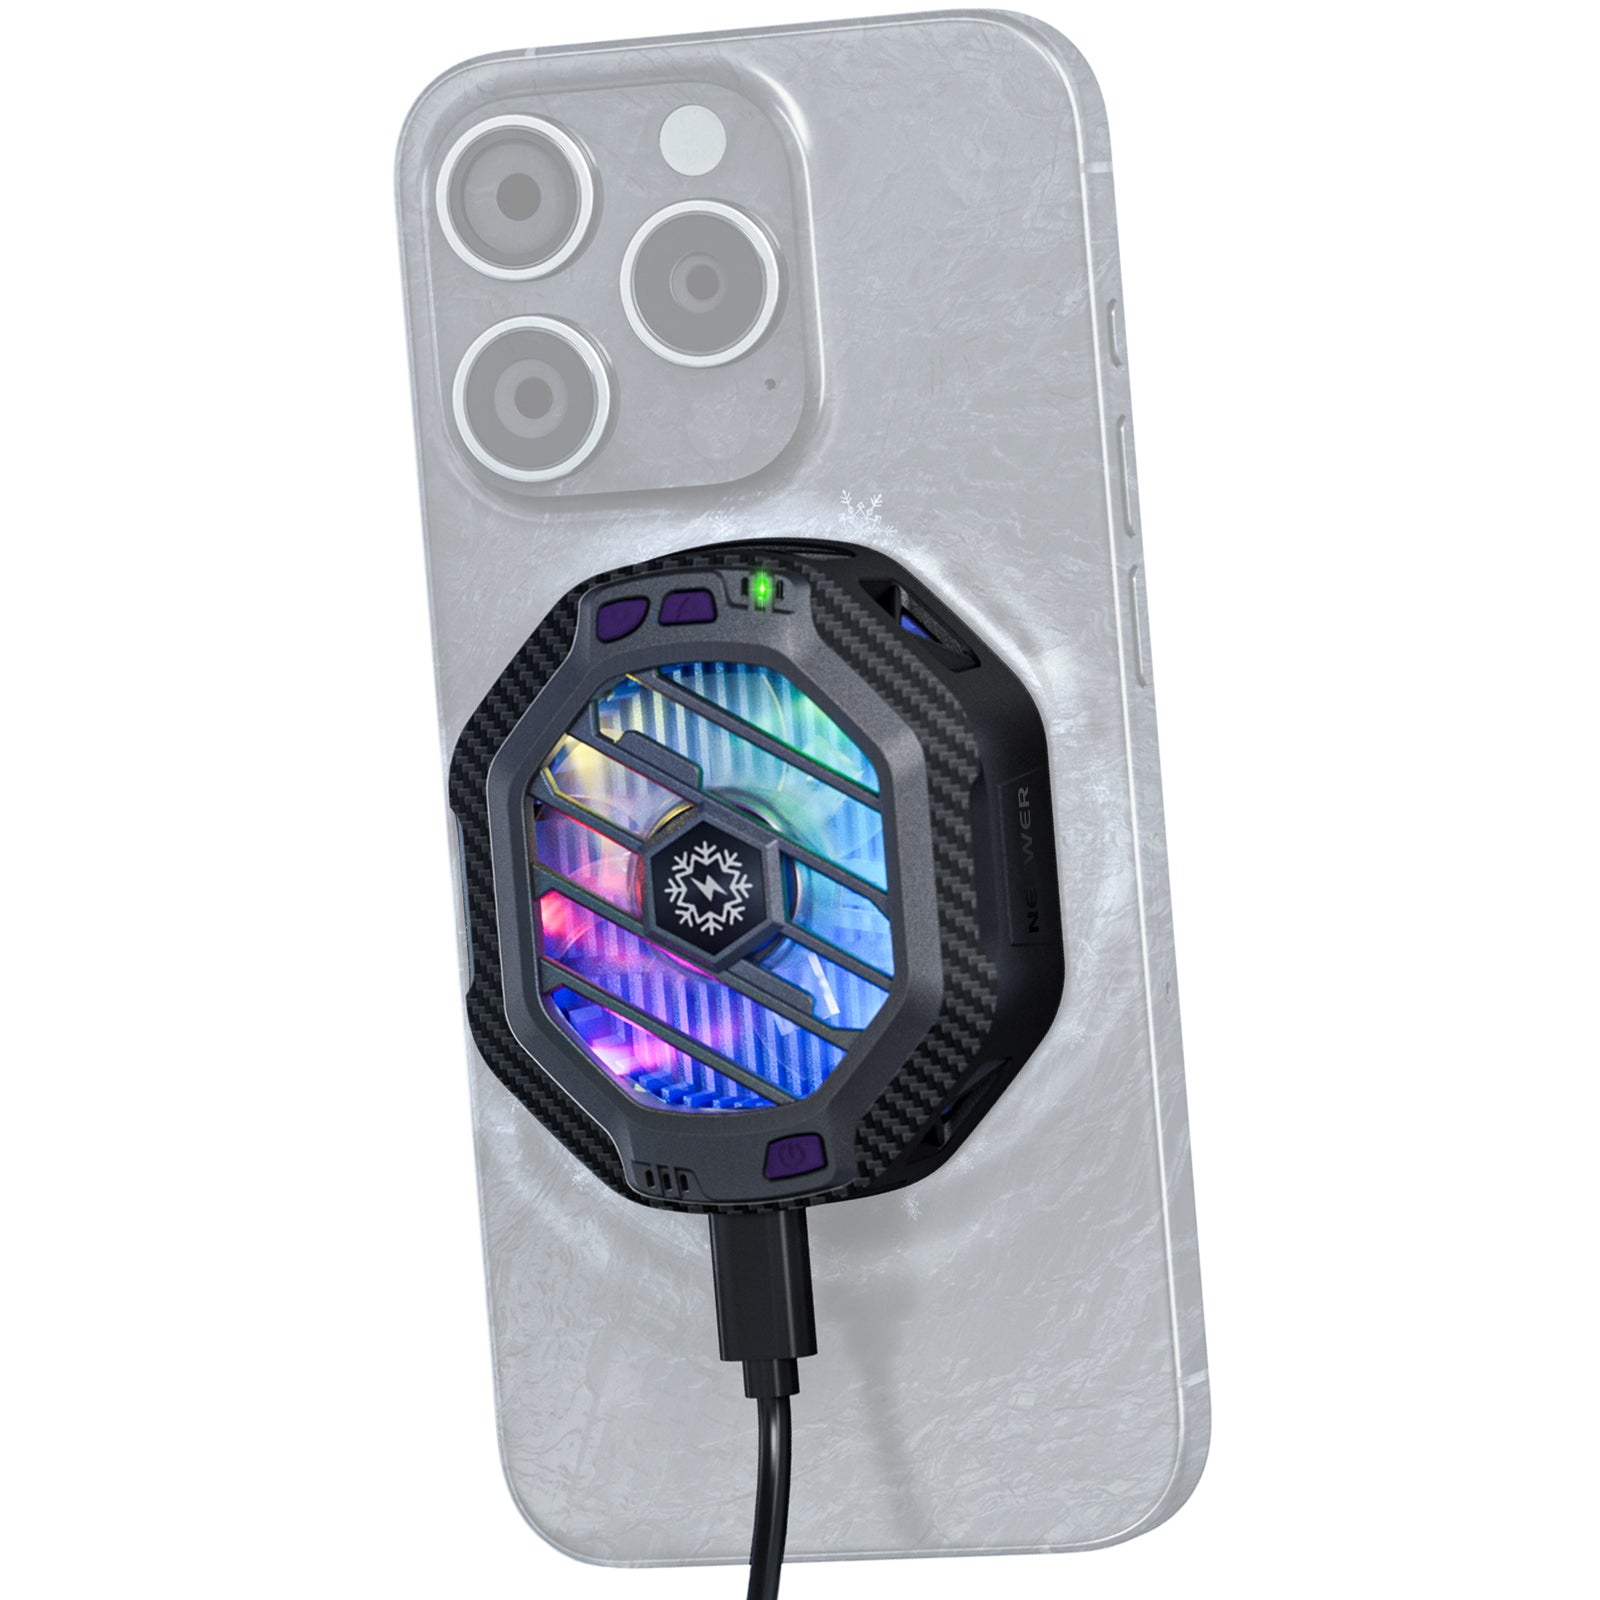 NEEWER PA060 Phone Fan Cooler Magnetic Wireless Charger